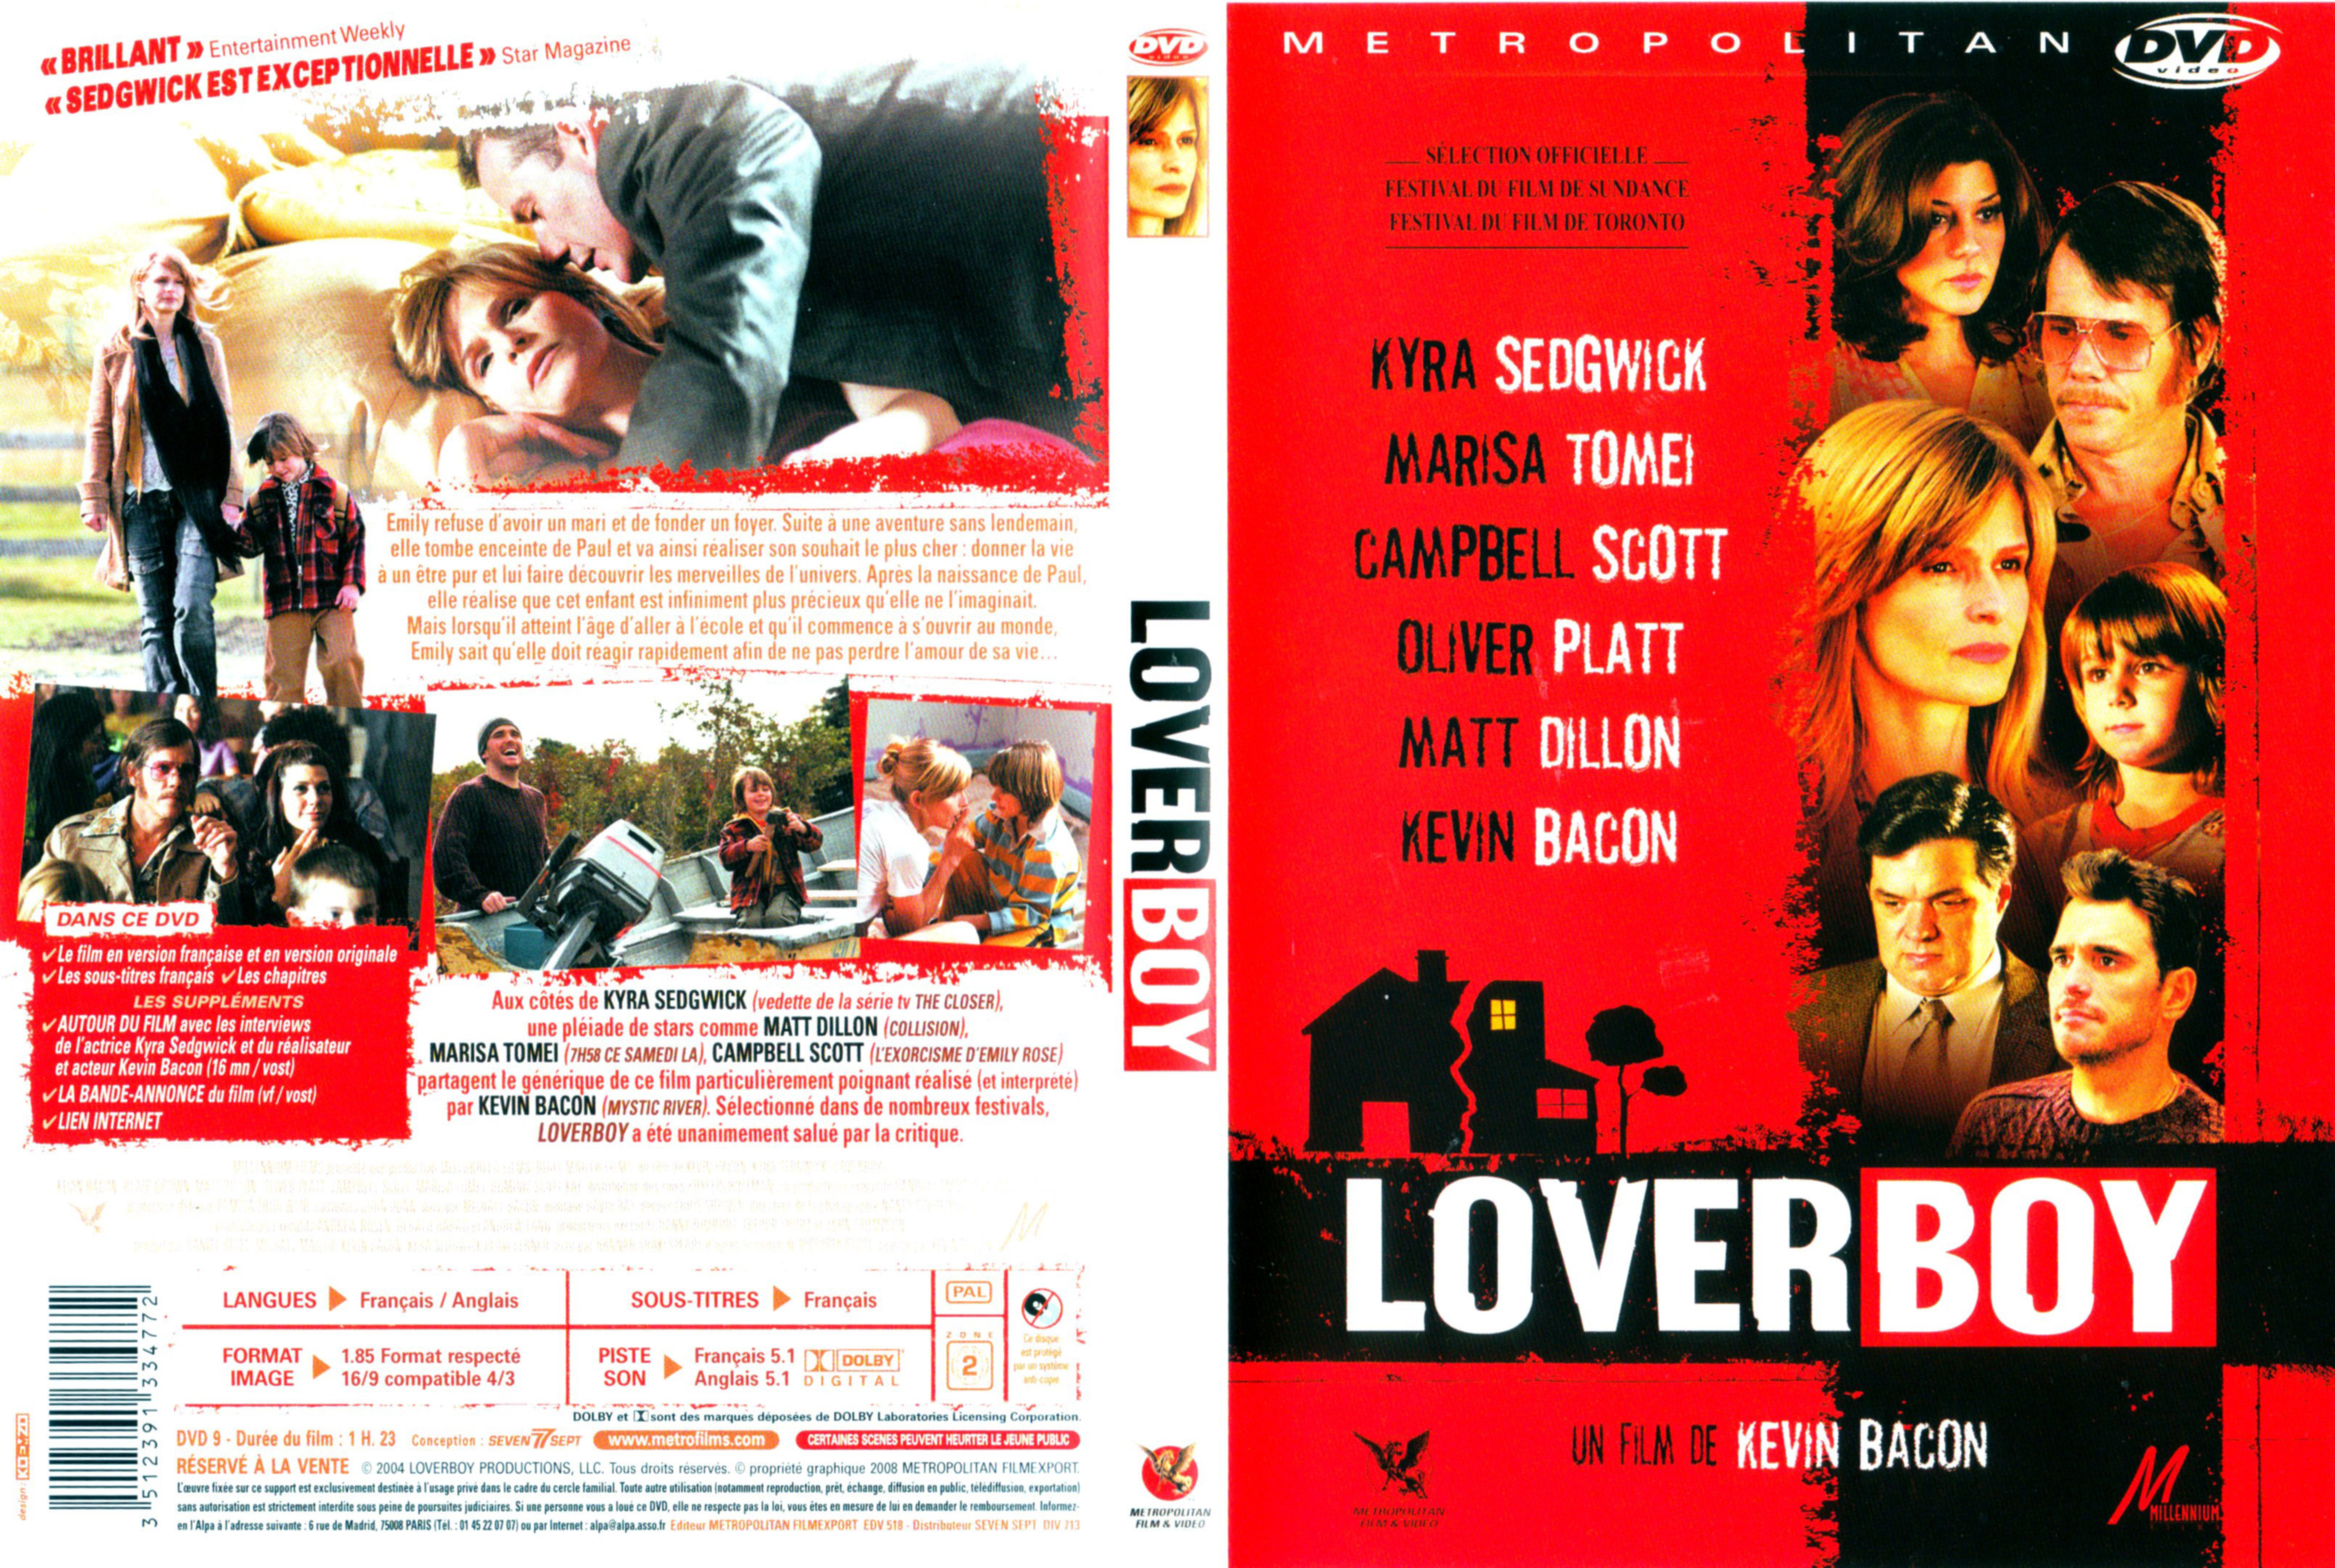 Jaquette DVD Loverboy